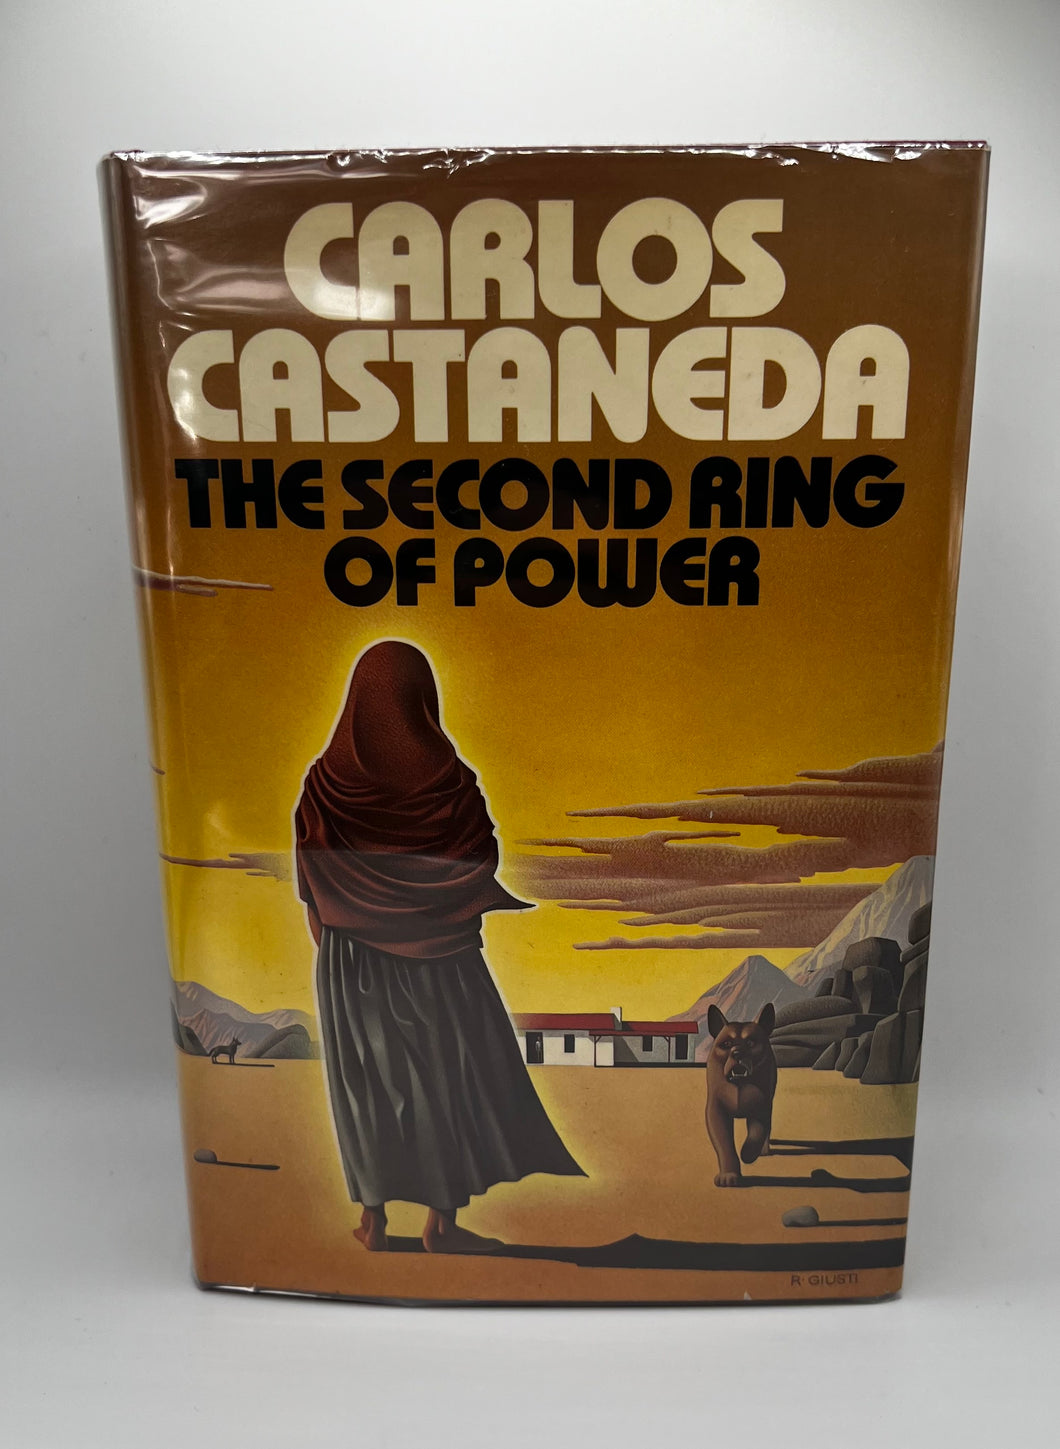 The Second Ring Of Power, by Carlos Castaneda (1st edition)